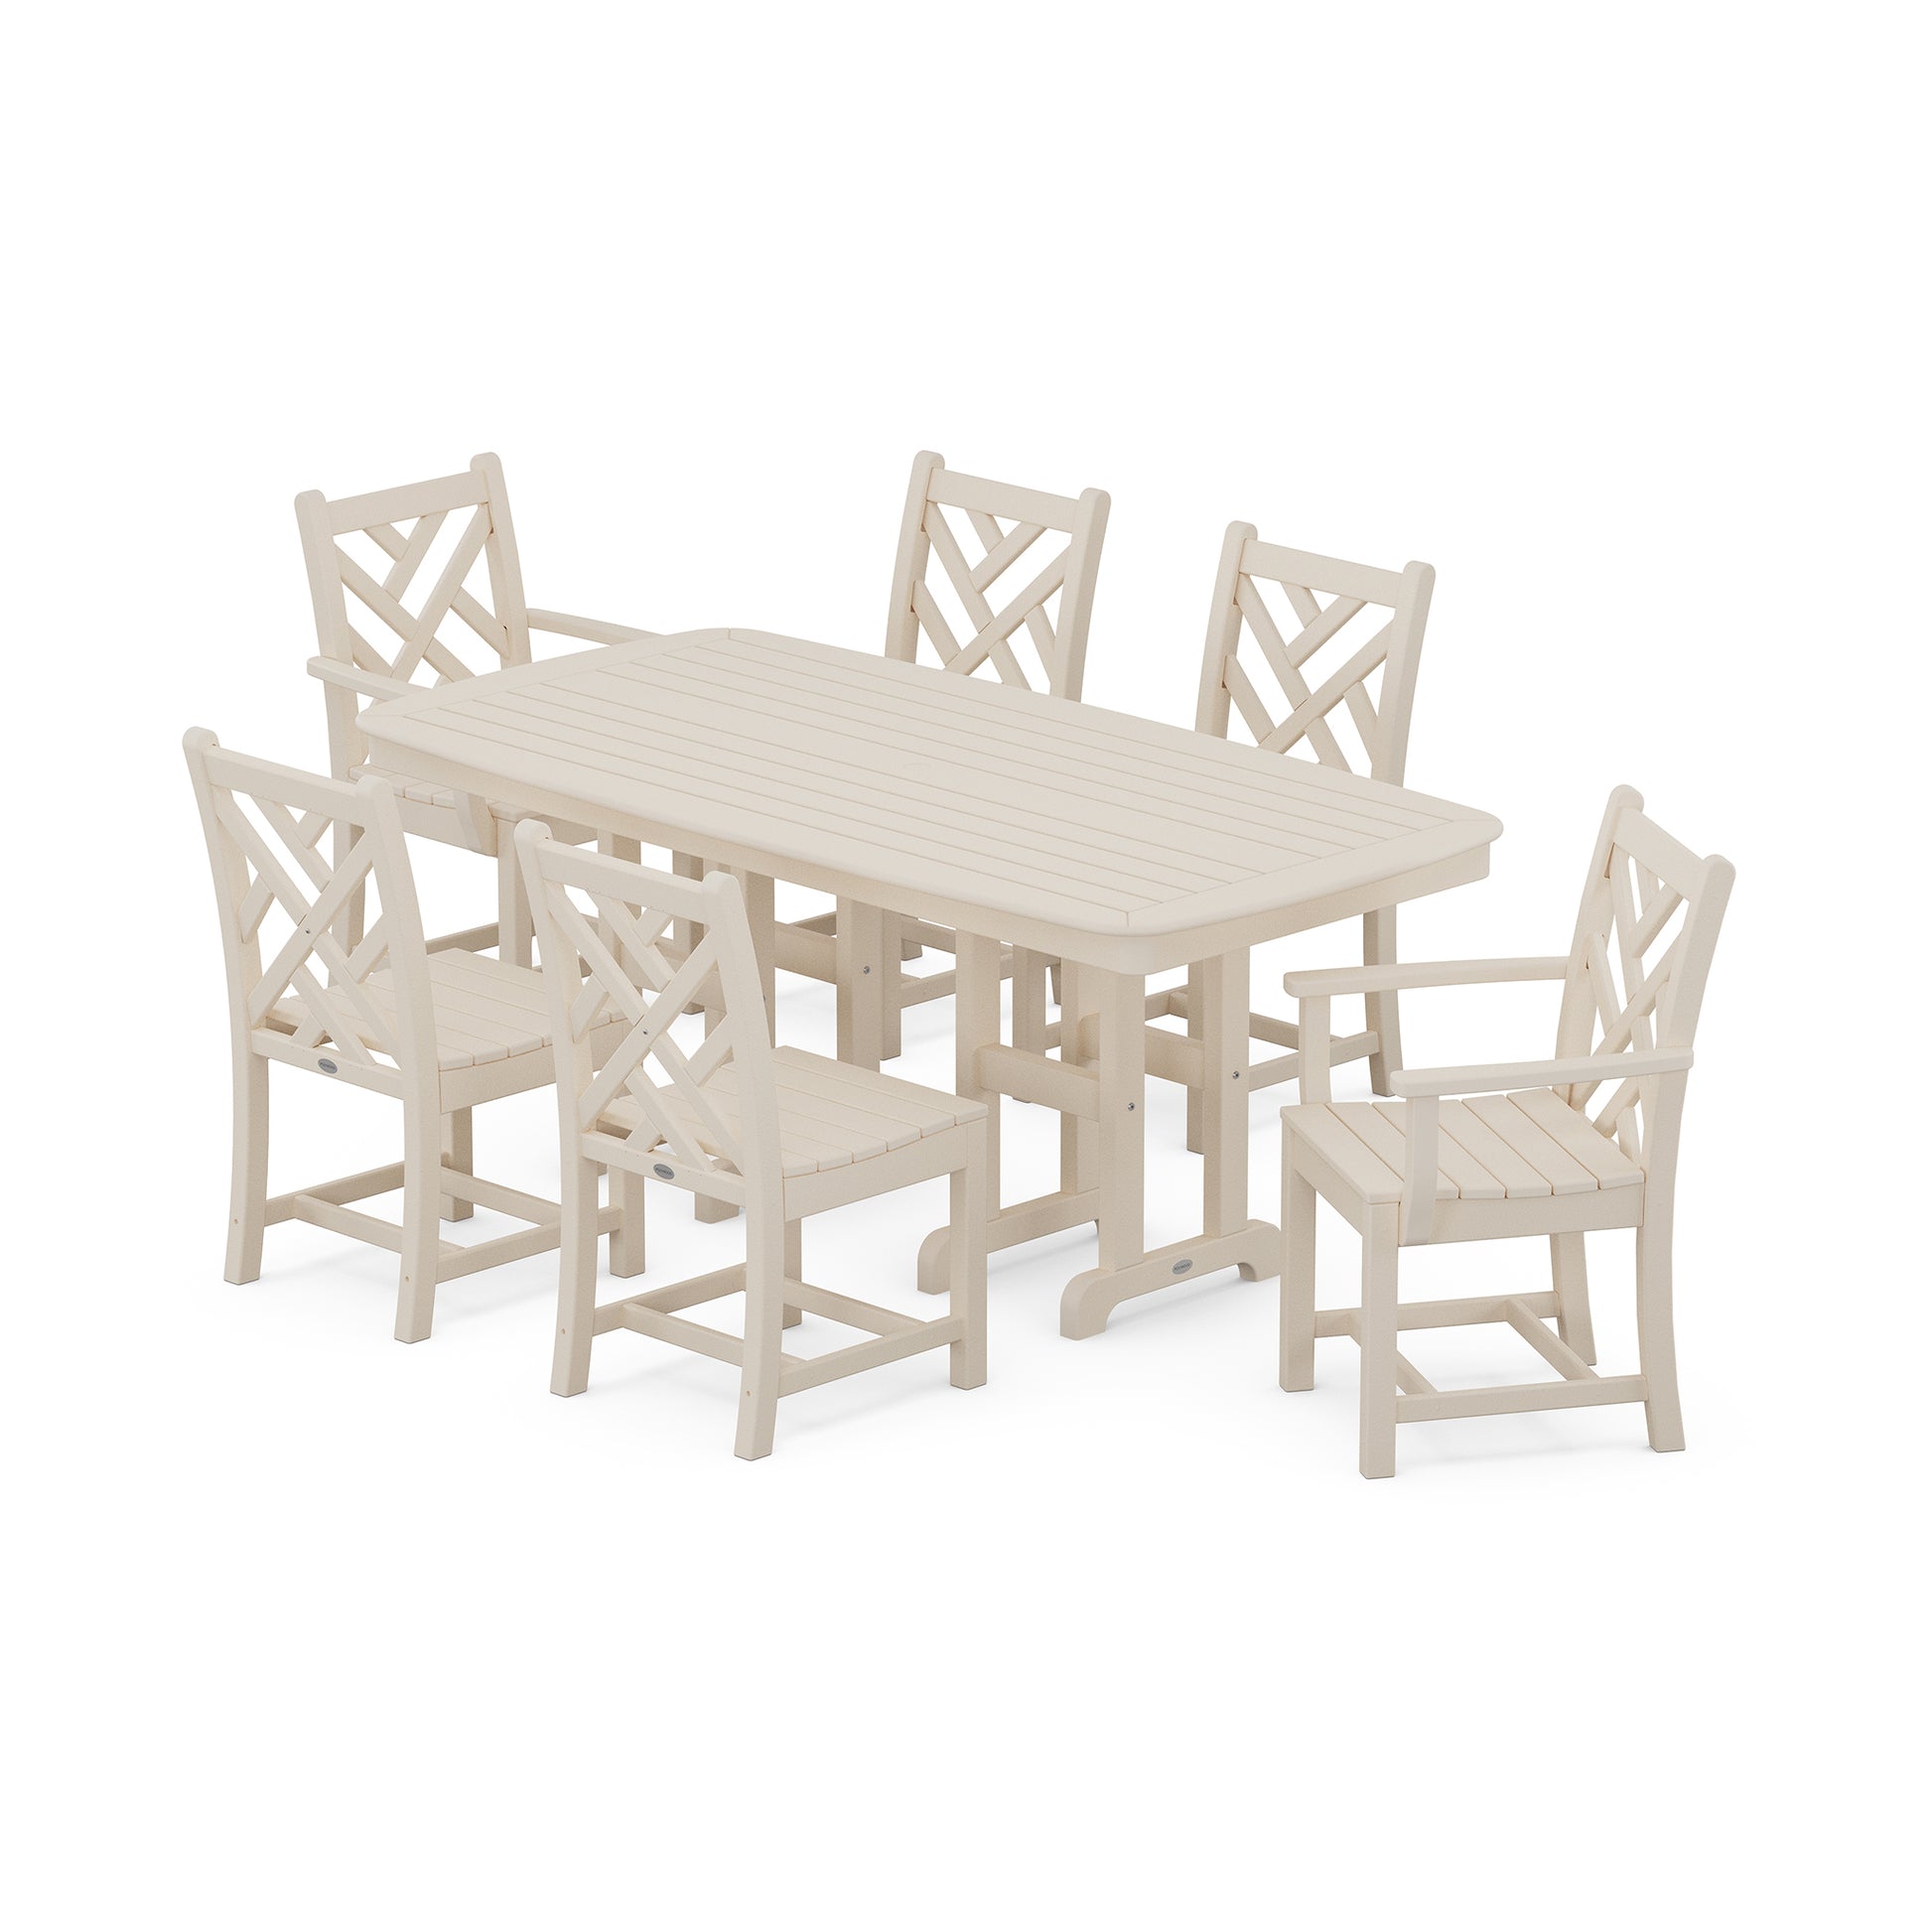 A light beige outdoor dining set consisting of a rectangular table and six chairs with x-back design, isolated on a white background. The POLYWOOD Chippendale 7-Piece Dining Set appears sturdy and is made of recycled lumber or synthetic material.